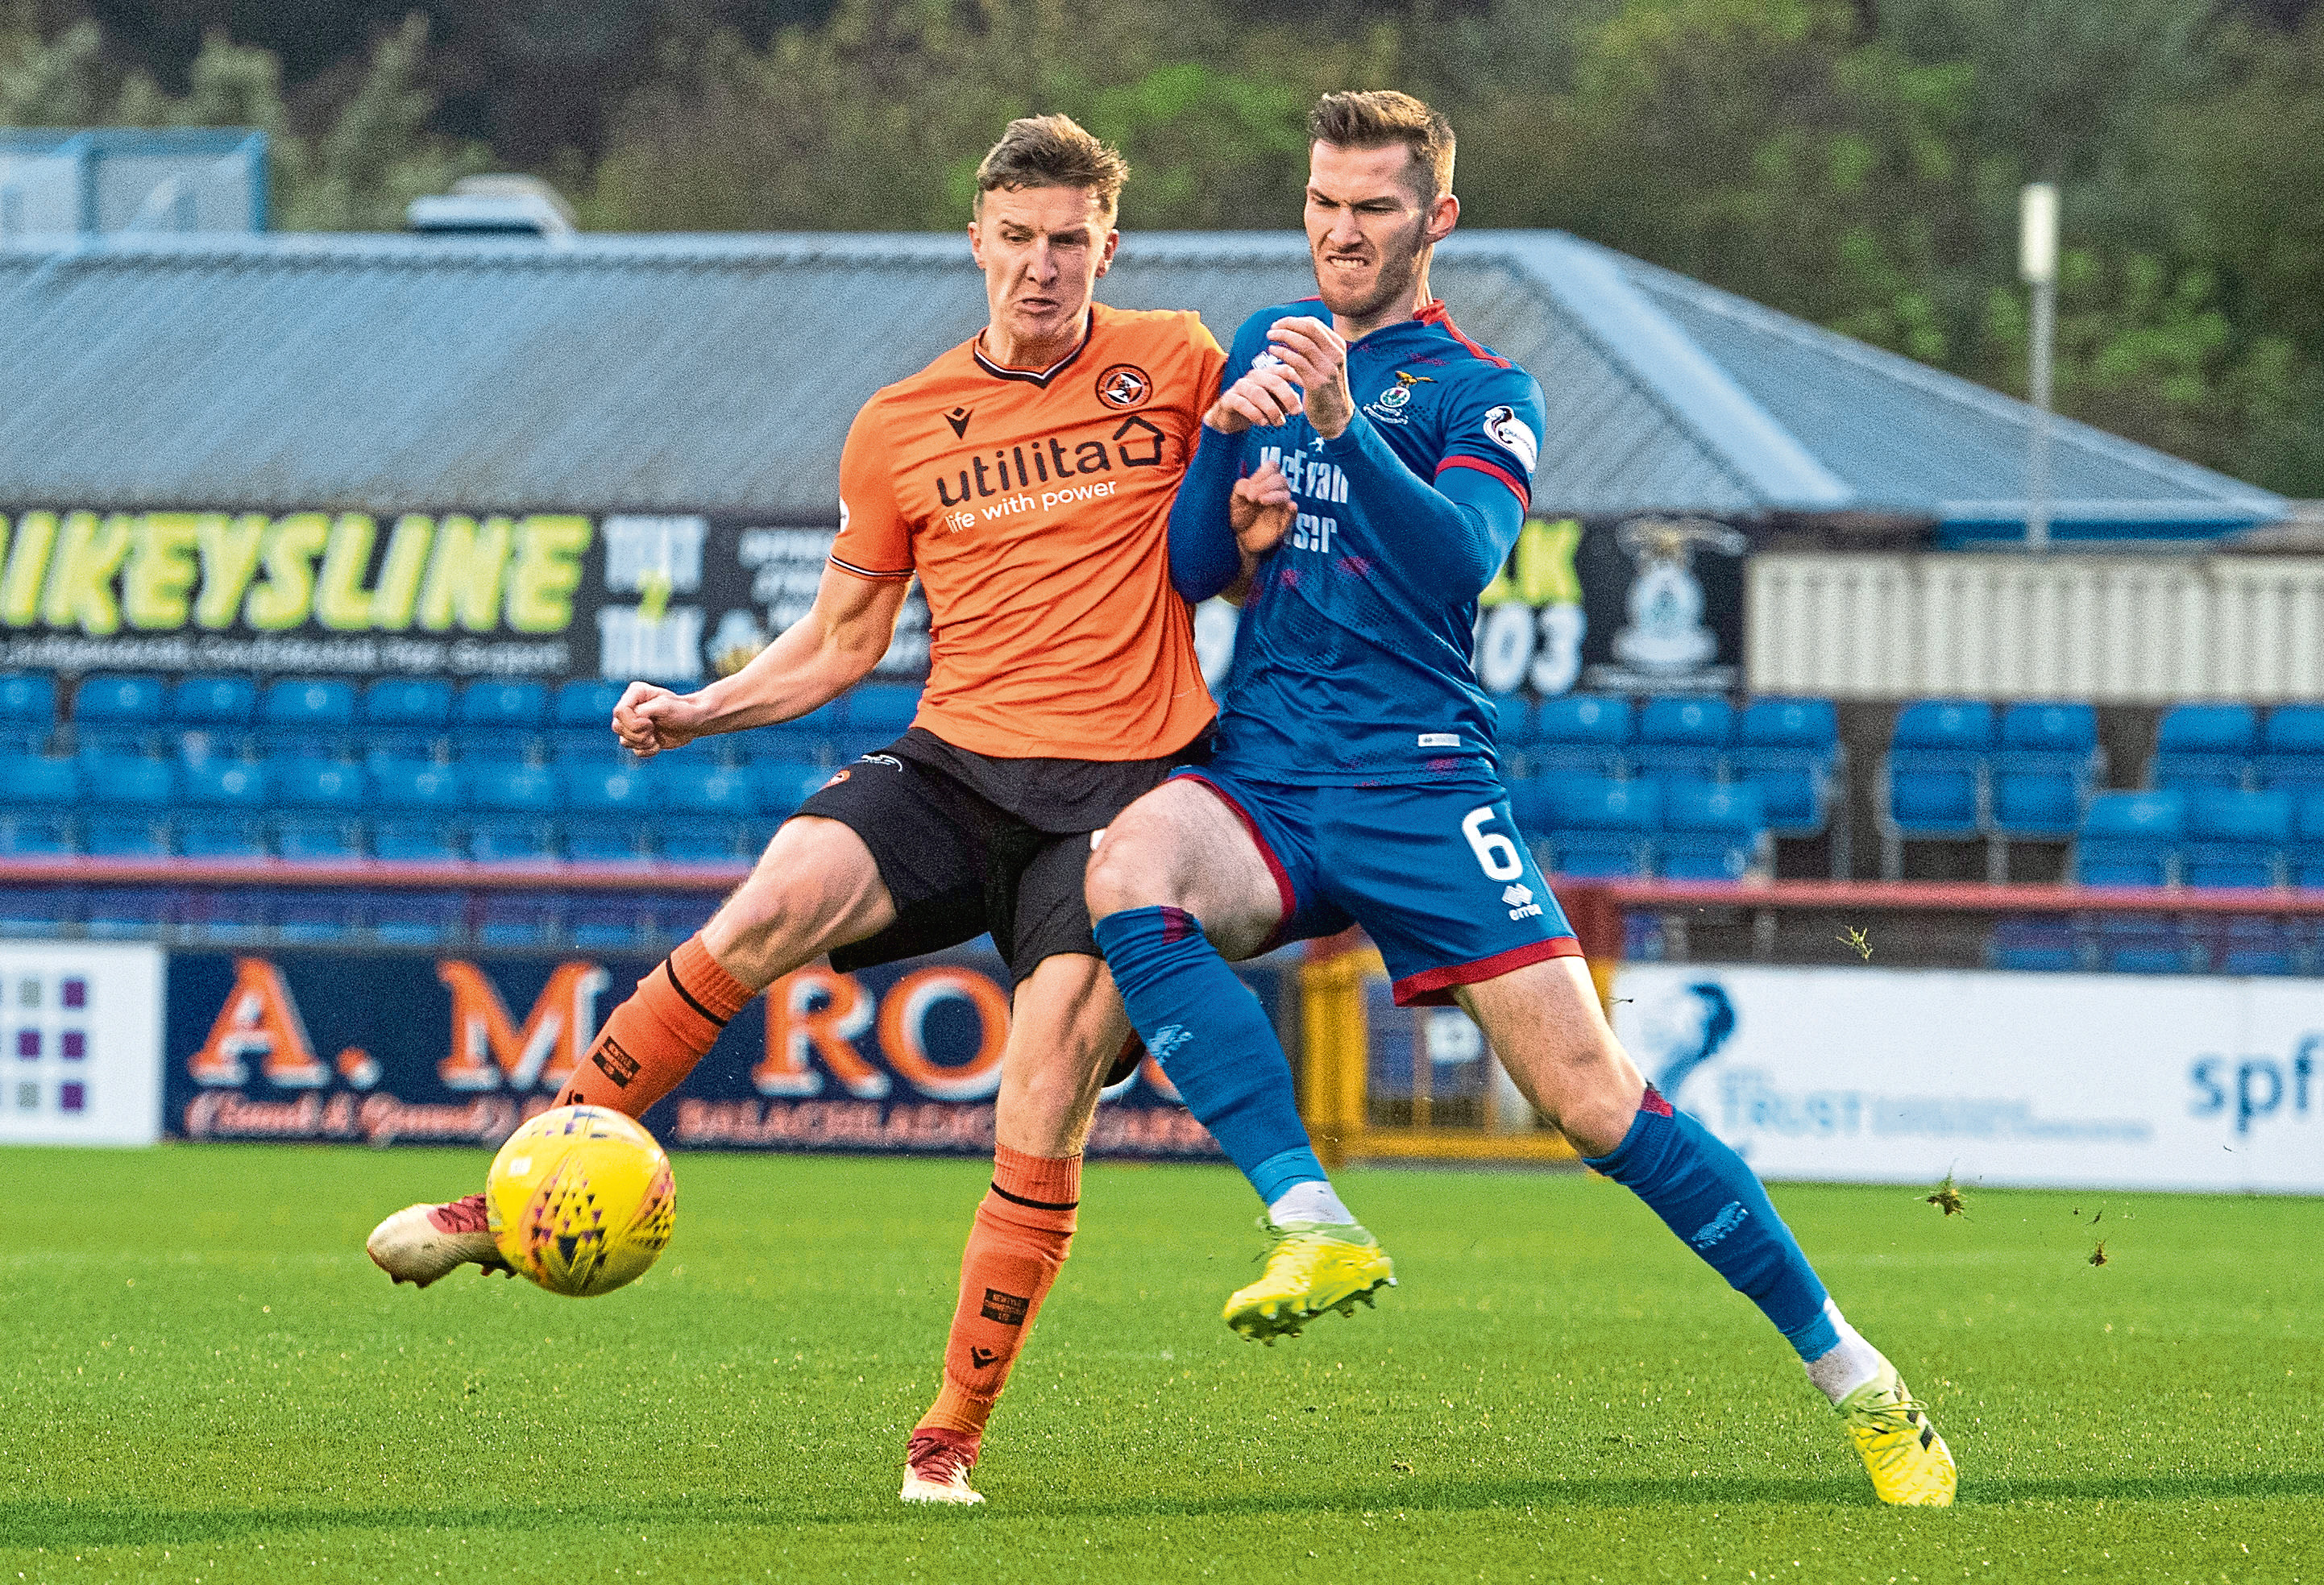 Dundee Utd's Paul Watson (L) and Inverness' Jamie McCart in action during the Ladbrokes Championship match between Inverness CT and Dundee United at the Caledonian Stadium, on November 2.